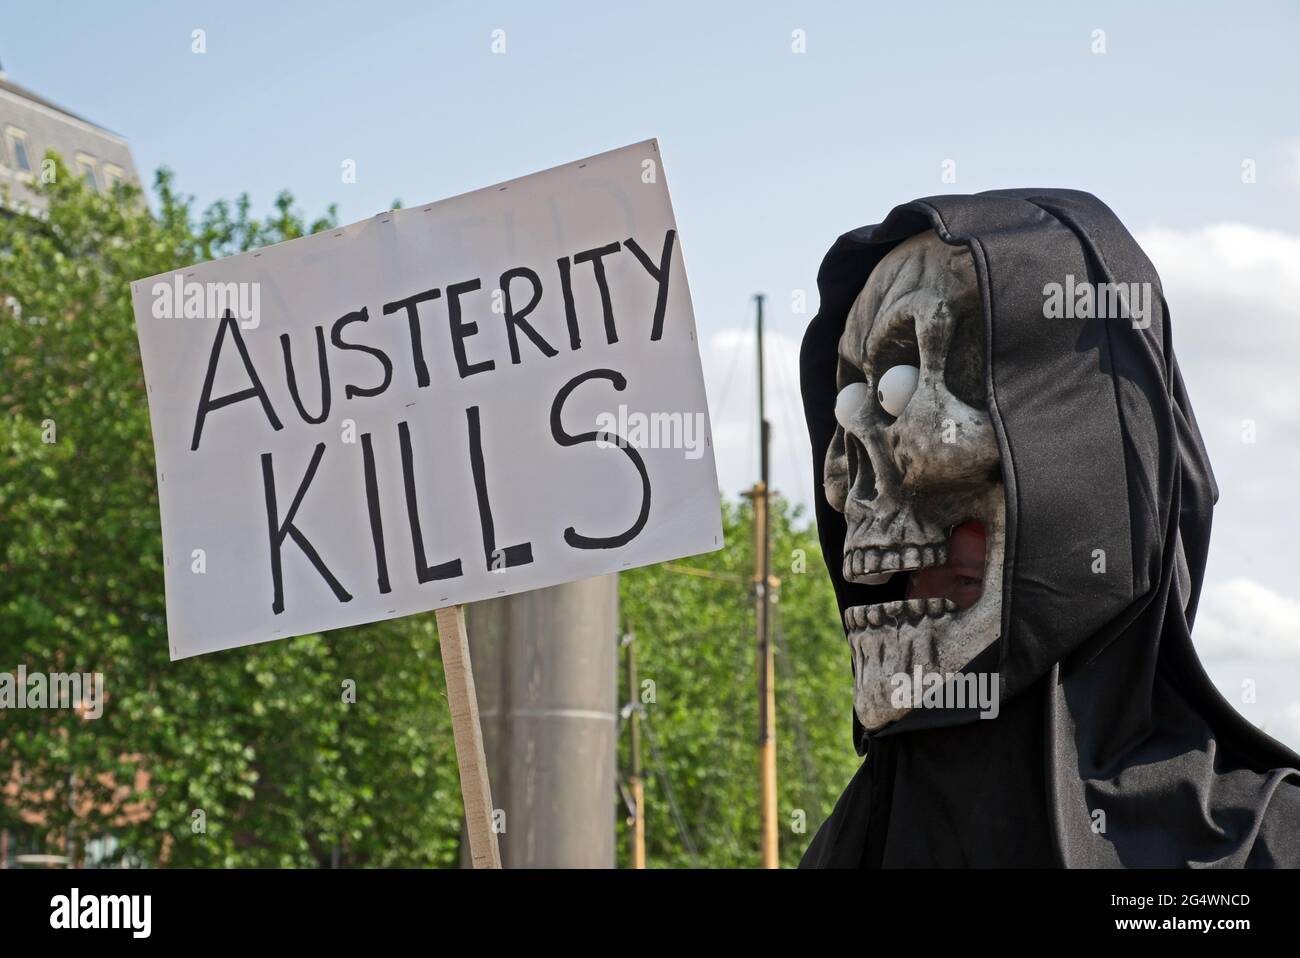 A masked anti-austerity demonstrator holds a placard with the slogan “AUSTERITY KILLS” in Bristol, UK on 8 July 2015 Stock Photo